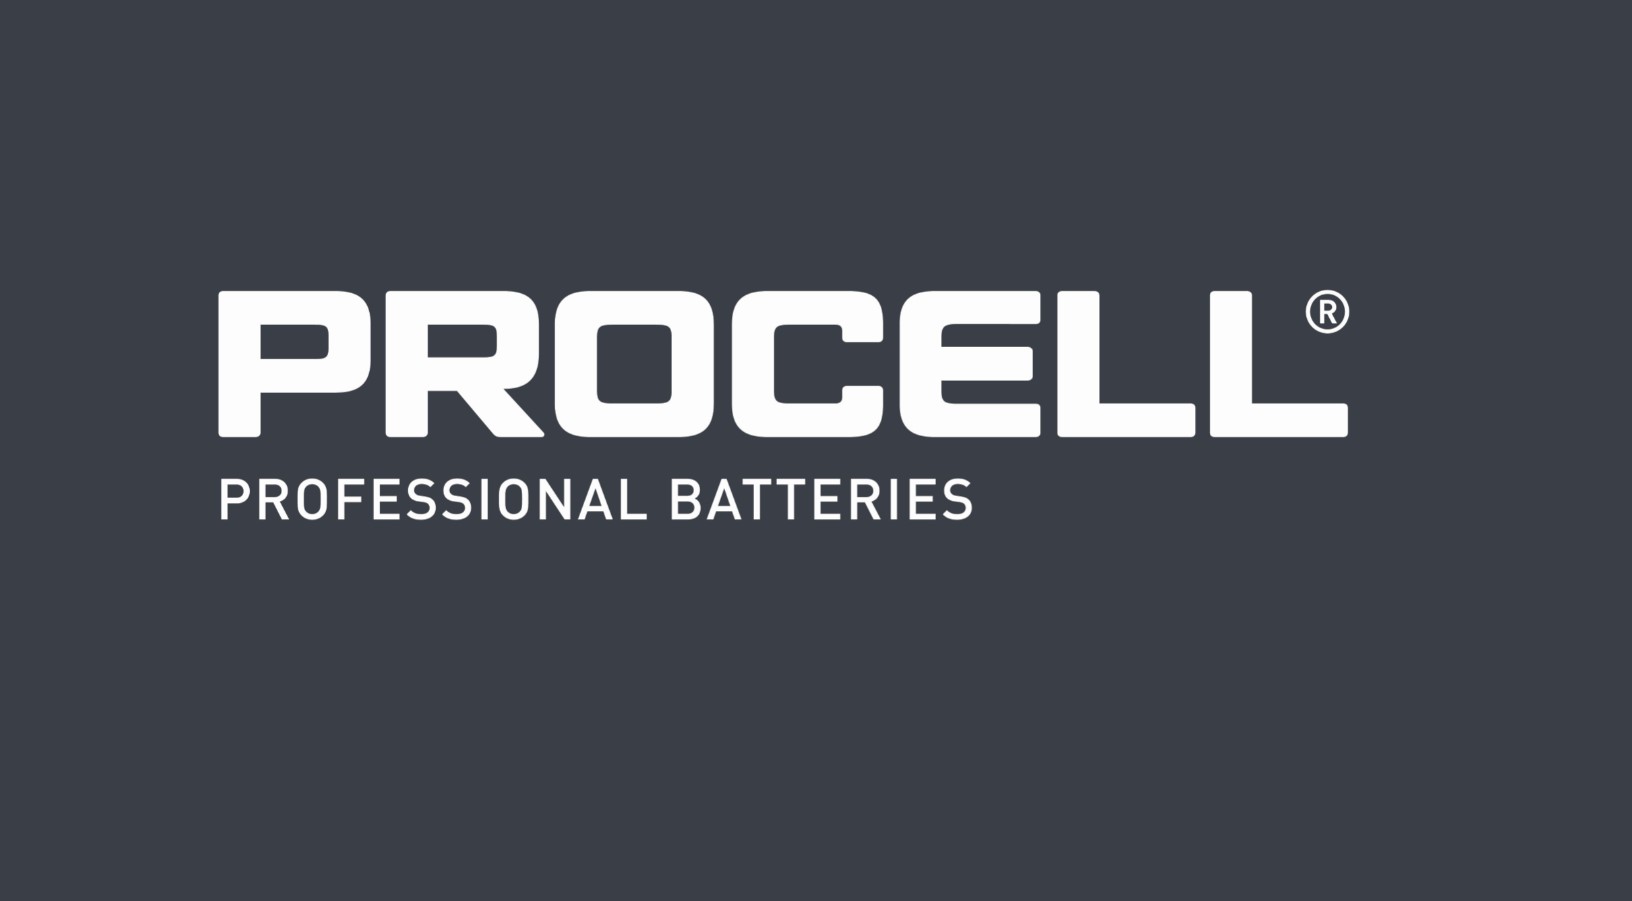 Procell Professional Batteries